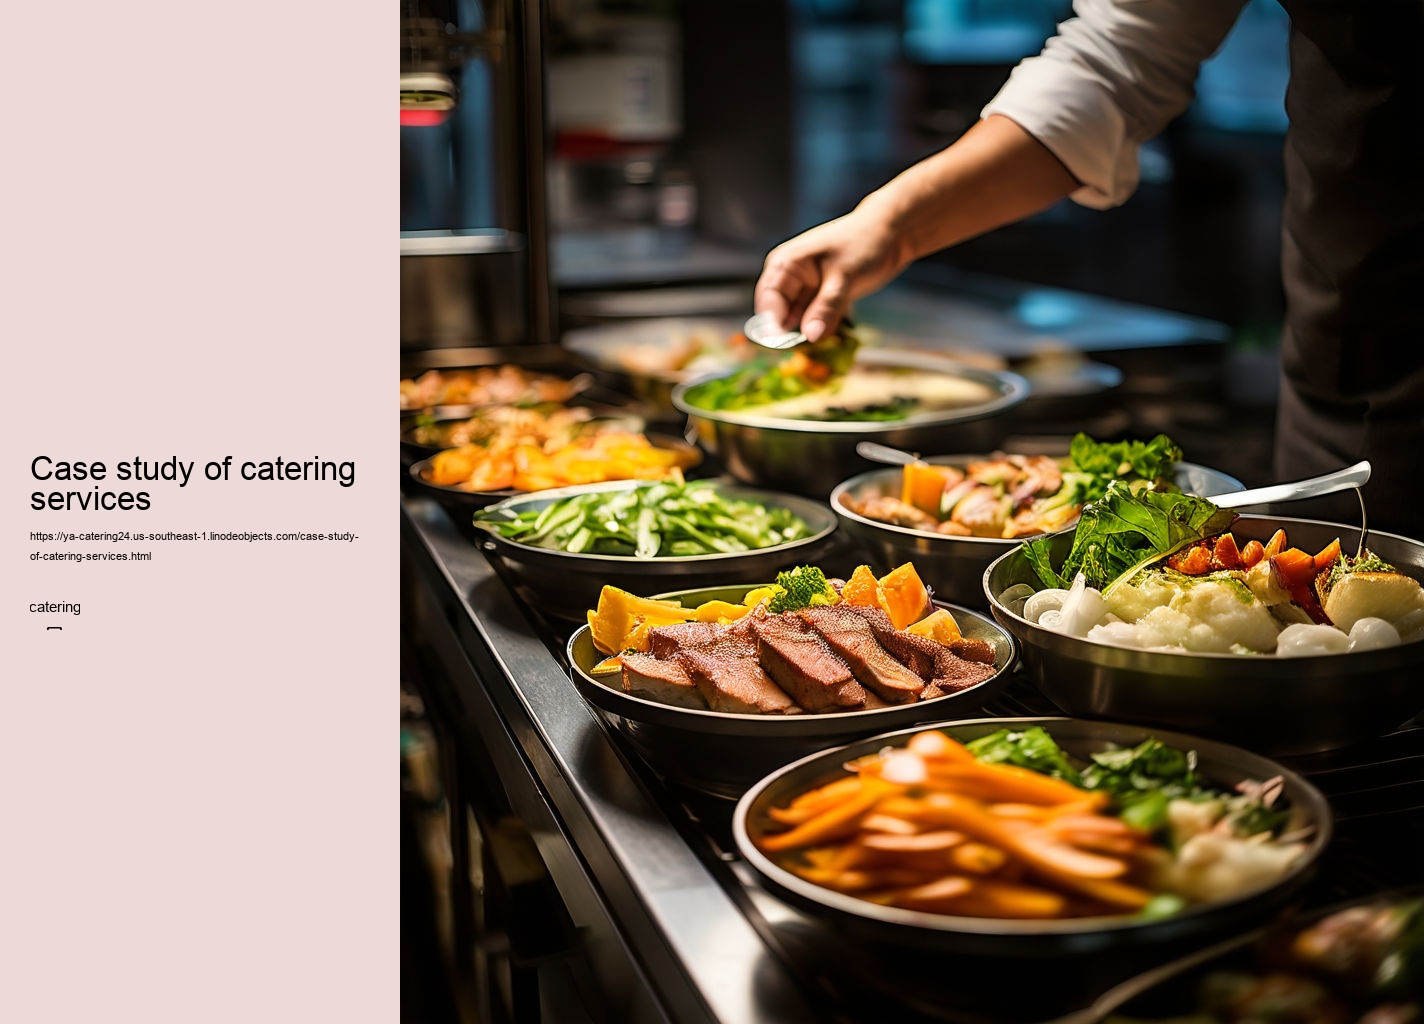 Case study of catering services